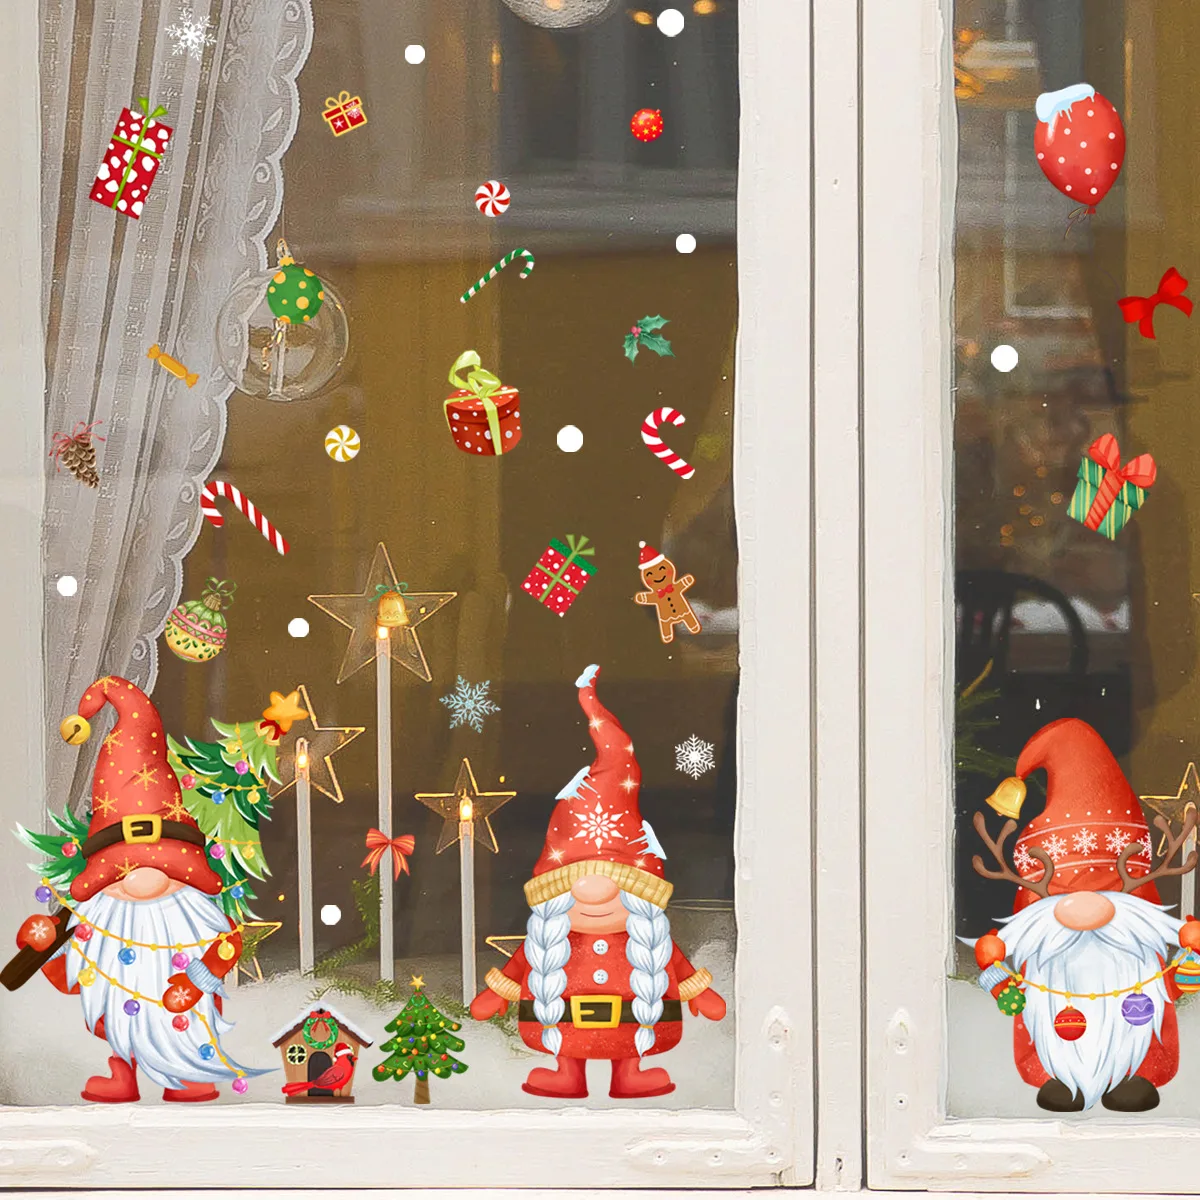 3pcs Cartoon Santa Christmas Static Stickers Wall Stickers Double-sided Visual Glass Window Wall Stickers Wallpapers Dj4035 scjyrxs 3pcs window glass control button passenger back door electric lift switch 8kd959855a for a6 a7 a8 q3 4gd959855